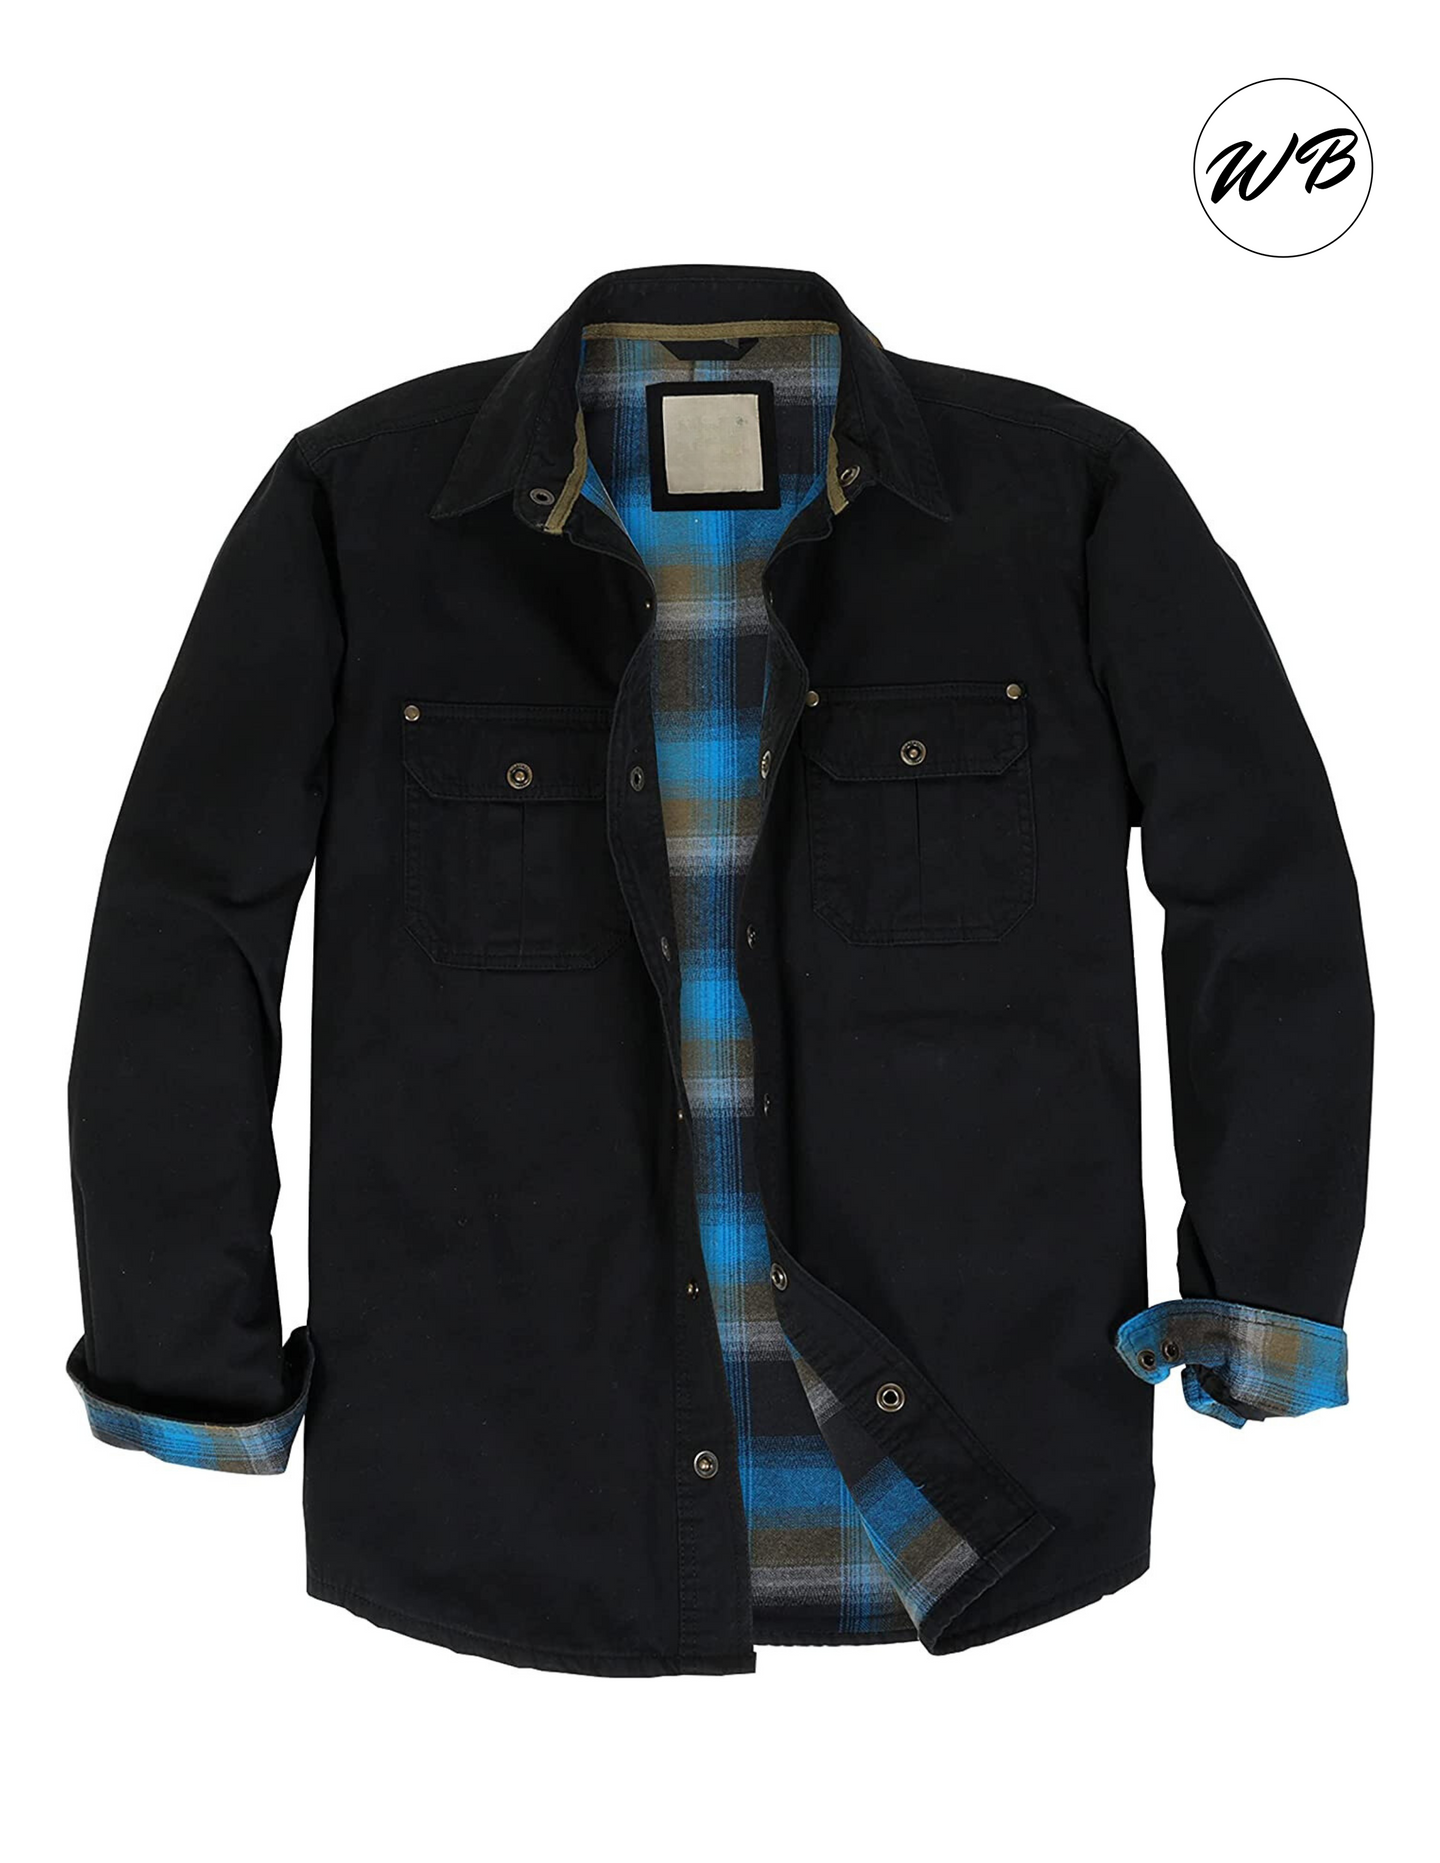 SPECIAL!! Men's Soft Twill Shirt Jacket with Flannel Lining.